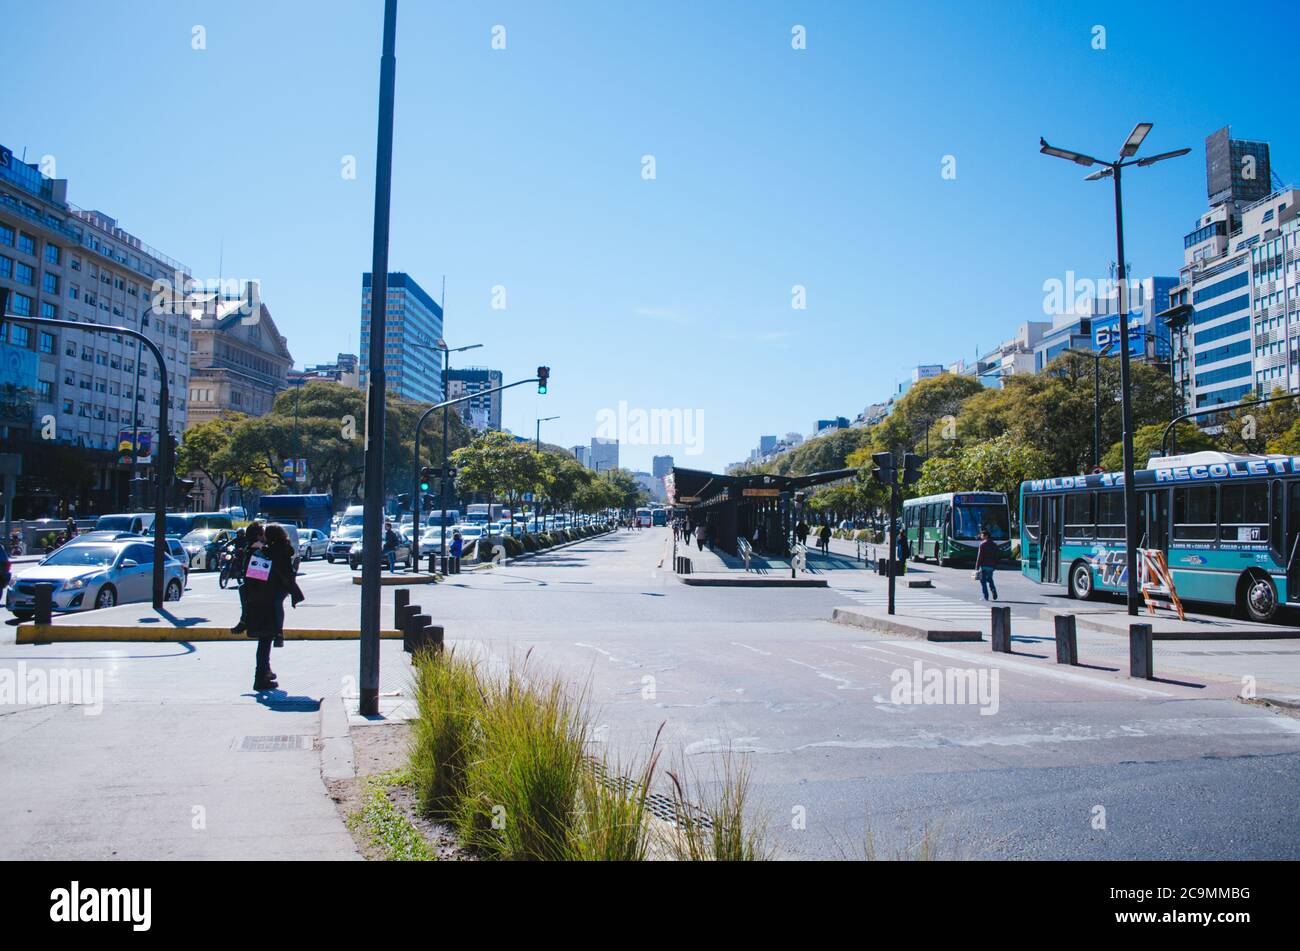 Buenos Aires, Argentina - September 4, 2018: Relatively empty bus stops and traffic jam in the main avenue of the argentinian capital. Stock Photo